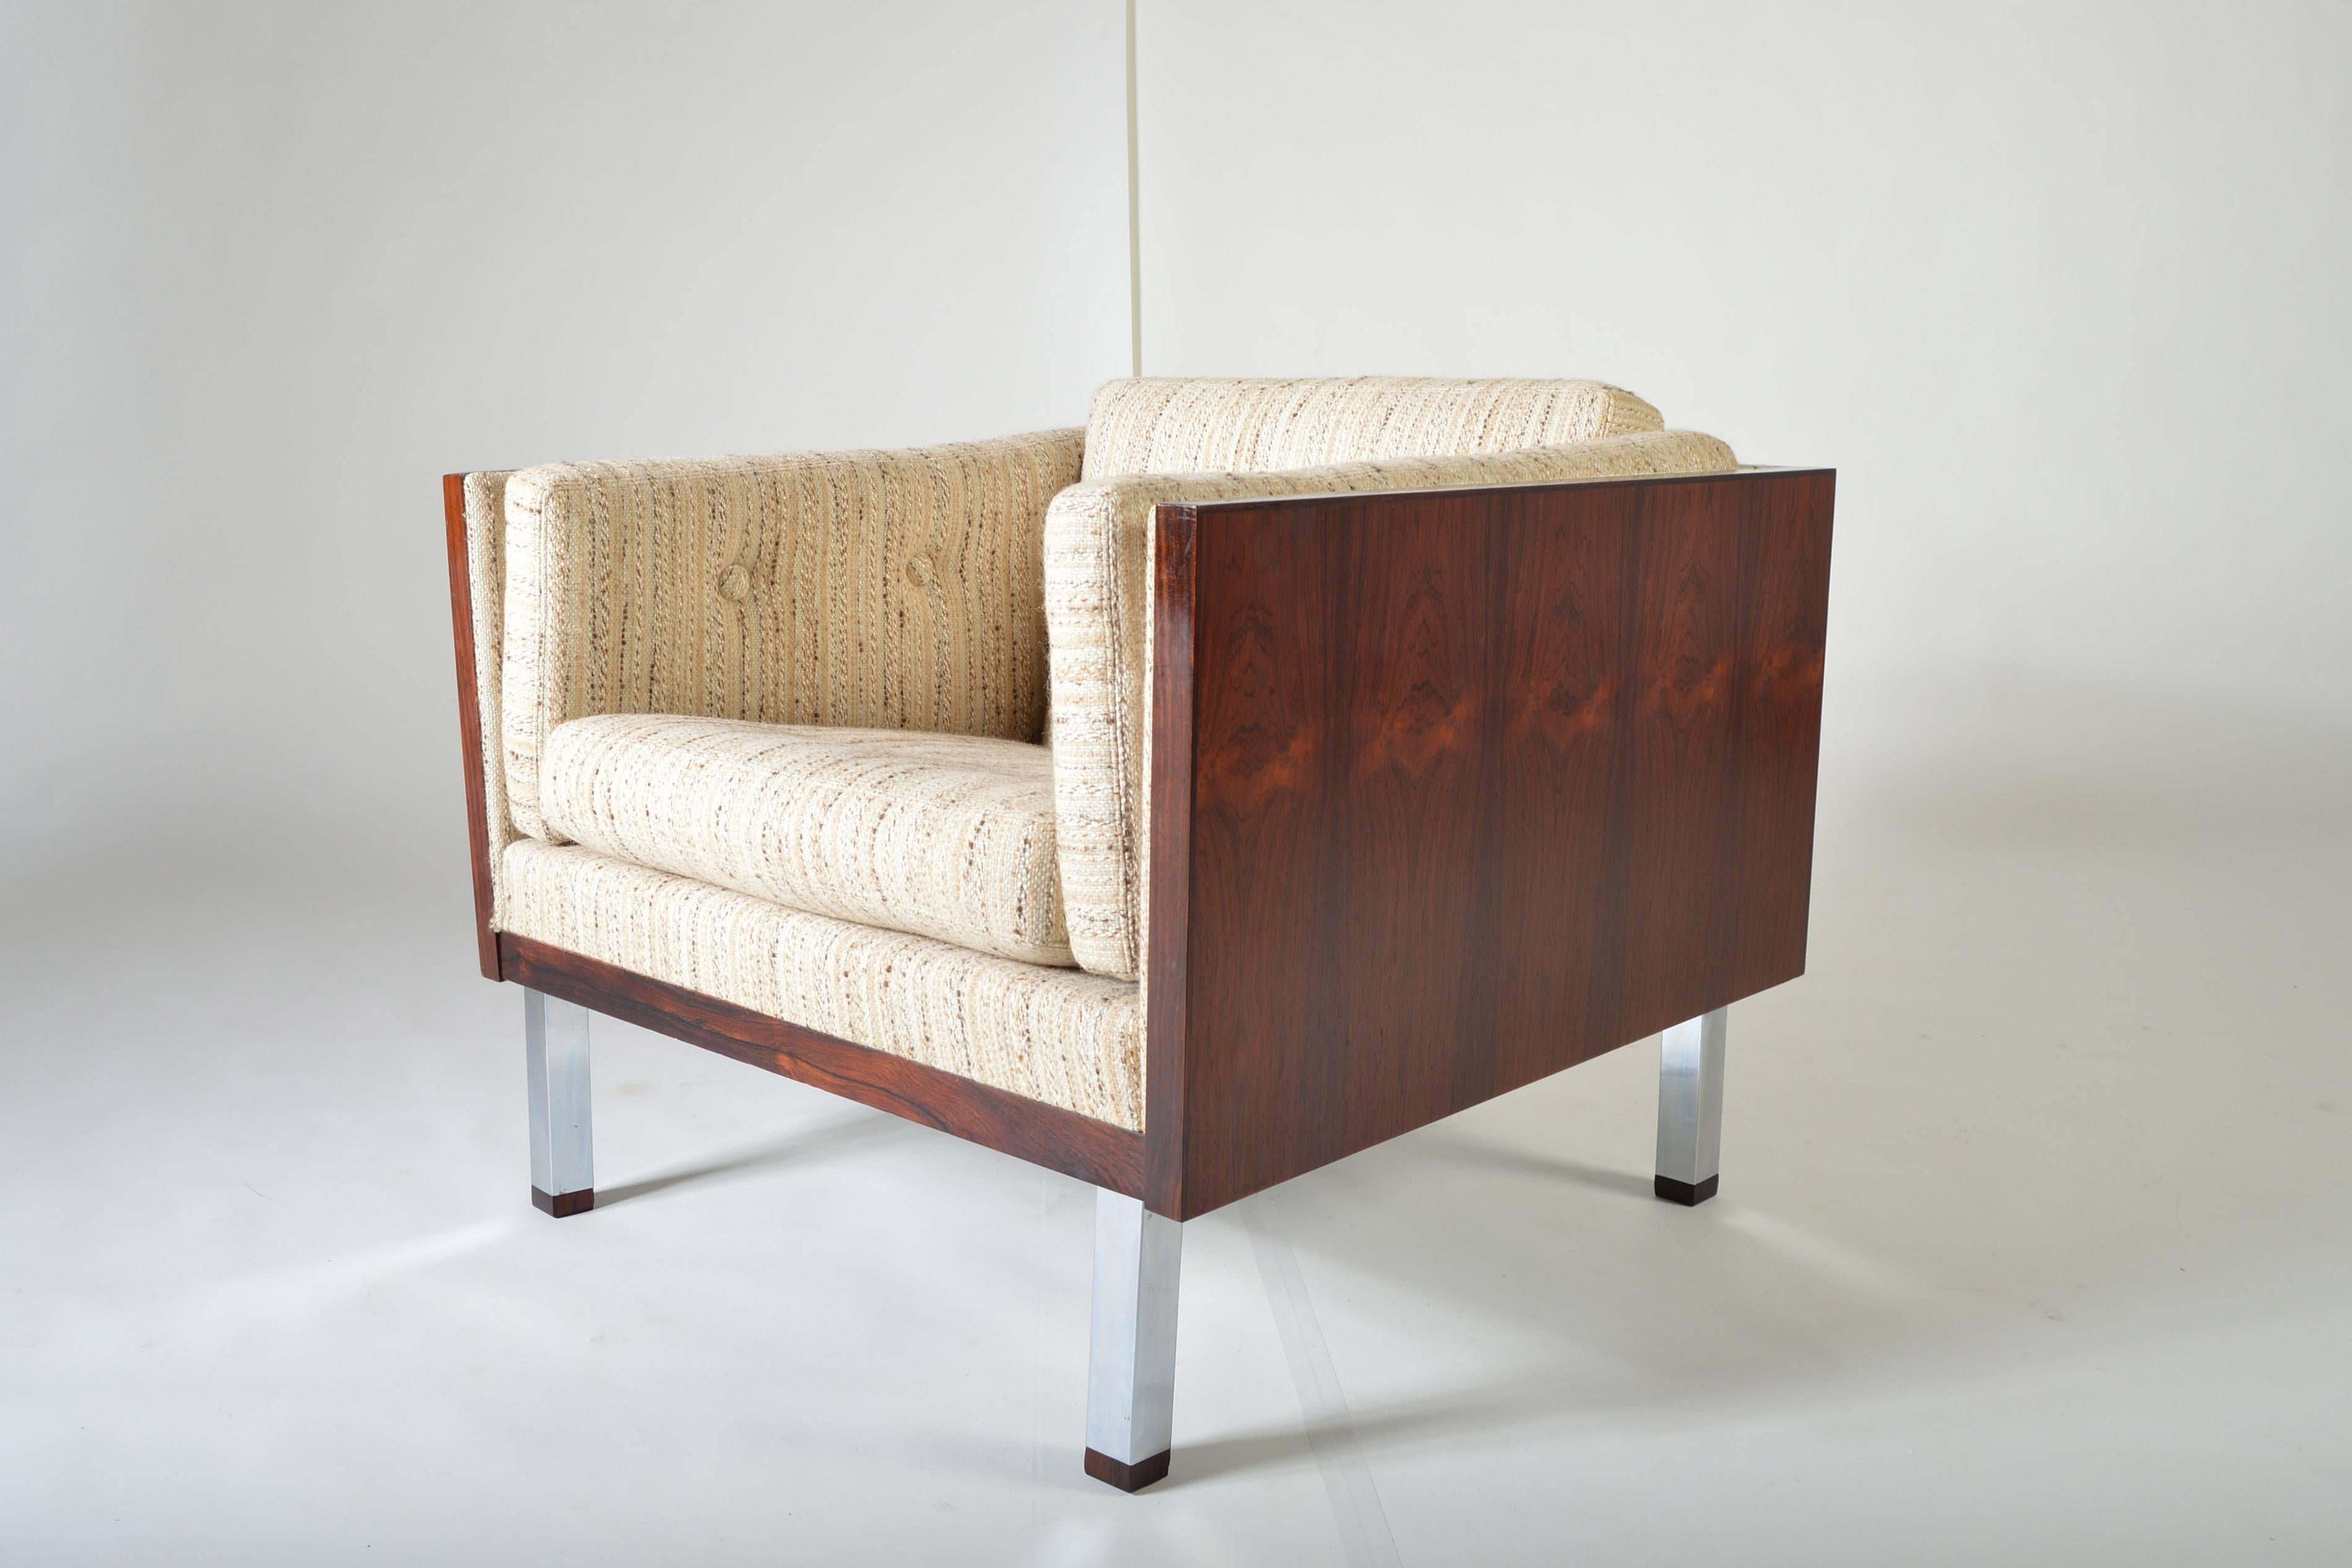 A beautifully cased rosewood lounge chair by Jydsk Mobelvaerk of Denmark. Very clean and comfortable.